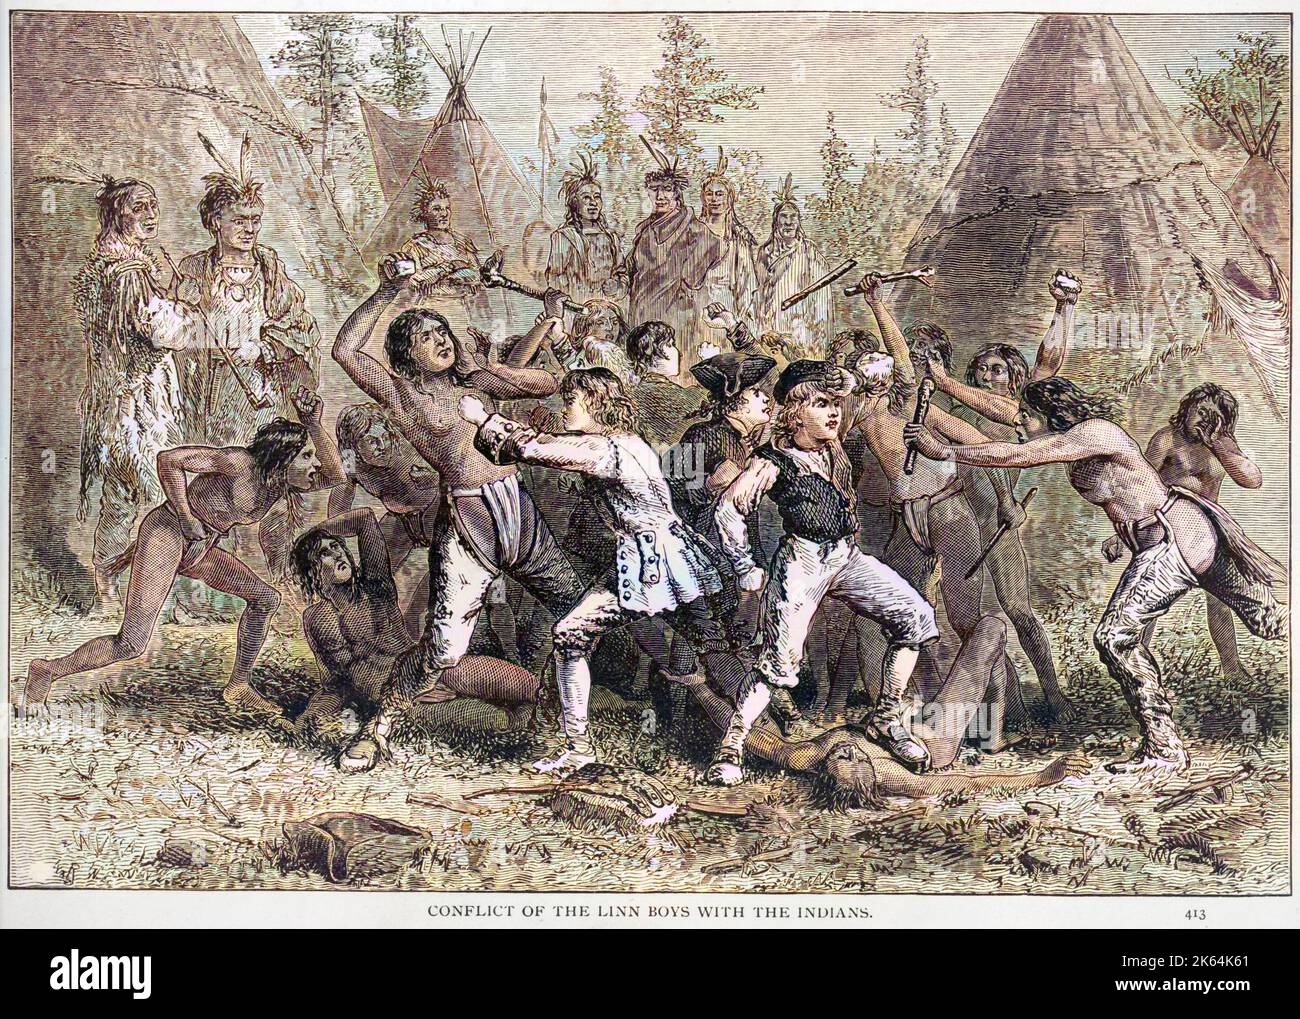 Conflict of the Linn boys with the Indians. Print showing Linn brothers in hand-to-hand combat in a Native American village, Kentucky, ca. 1785. Date 1883. Stock Photo